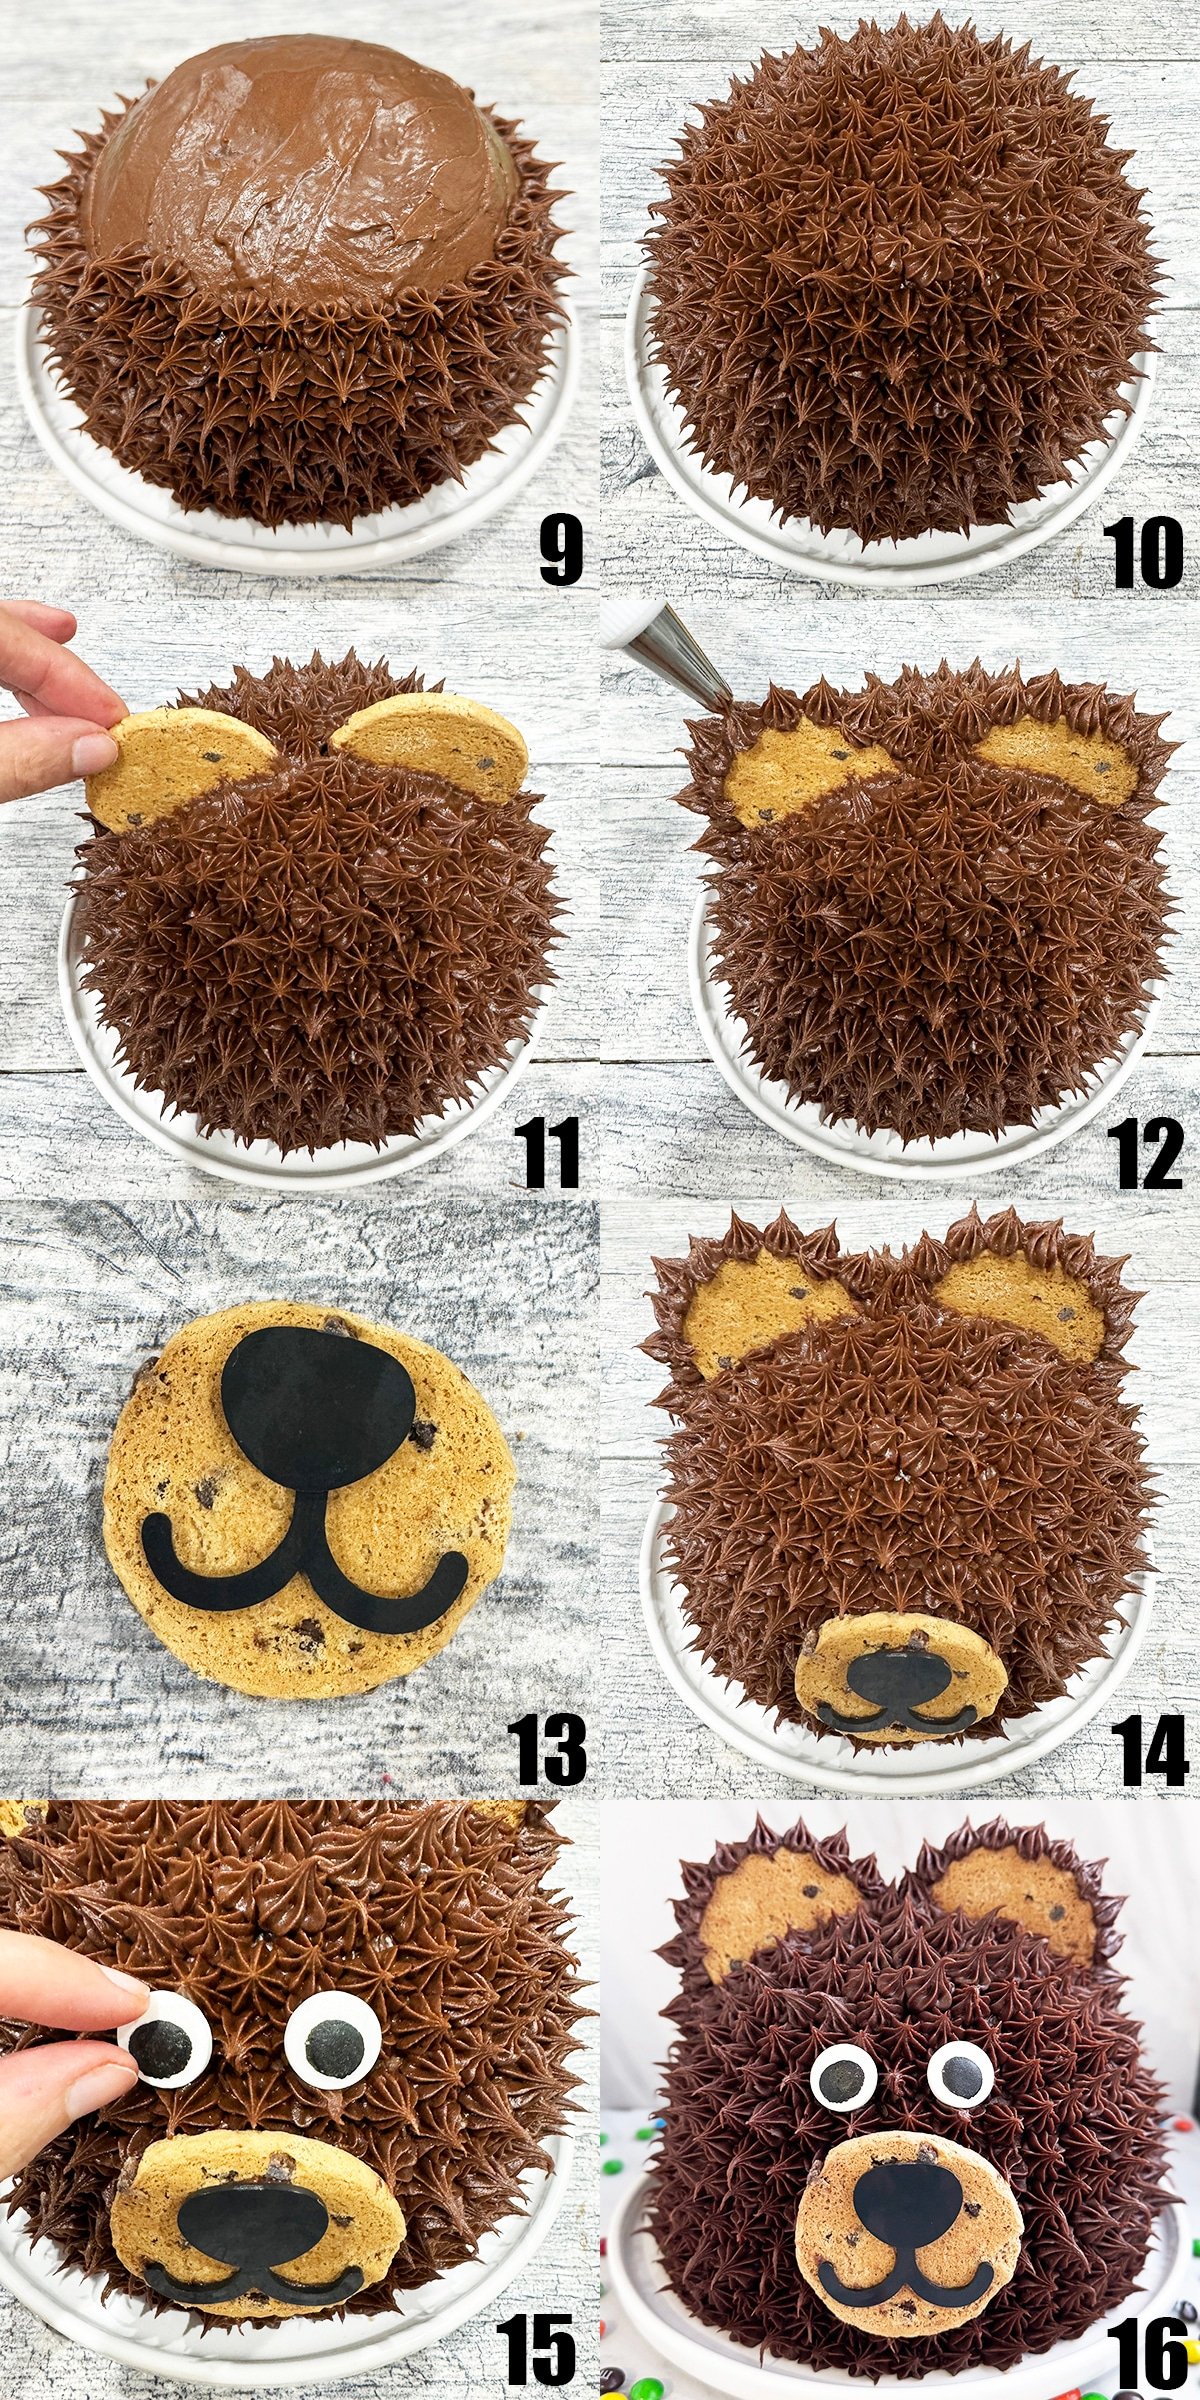 Collage Image With Step by Step Process Shots on How to Make Teddy Bear Cake- Part 2.